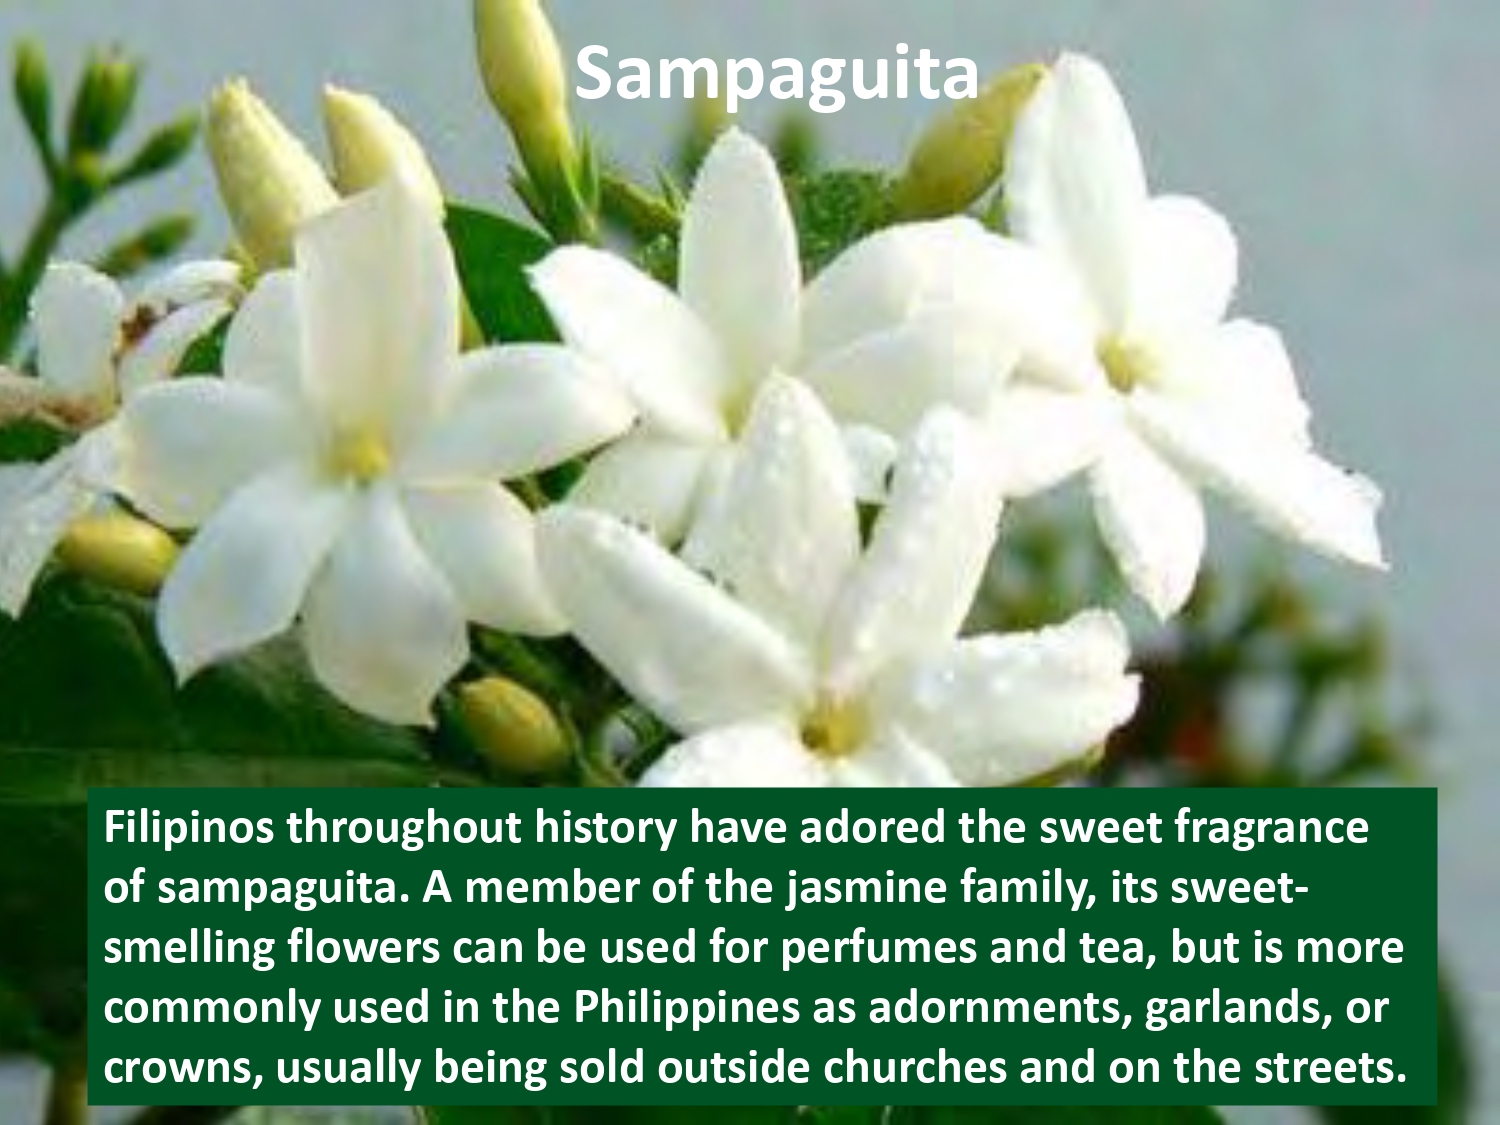 Filipinos throughout history have adored the sweet fragrance of sampaguita. A member of the jasmine family, its sweetsmelling flowers can be used for perfumes and tea, but is more commonly used in the Philippines as adornments, garlands, or crowns, usually being sold outside churches and on the streets.